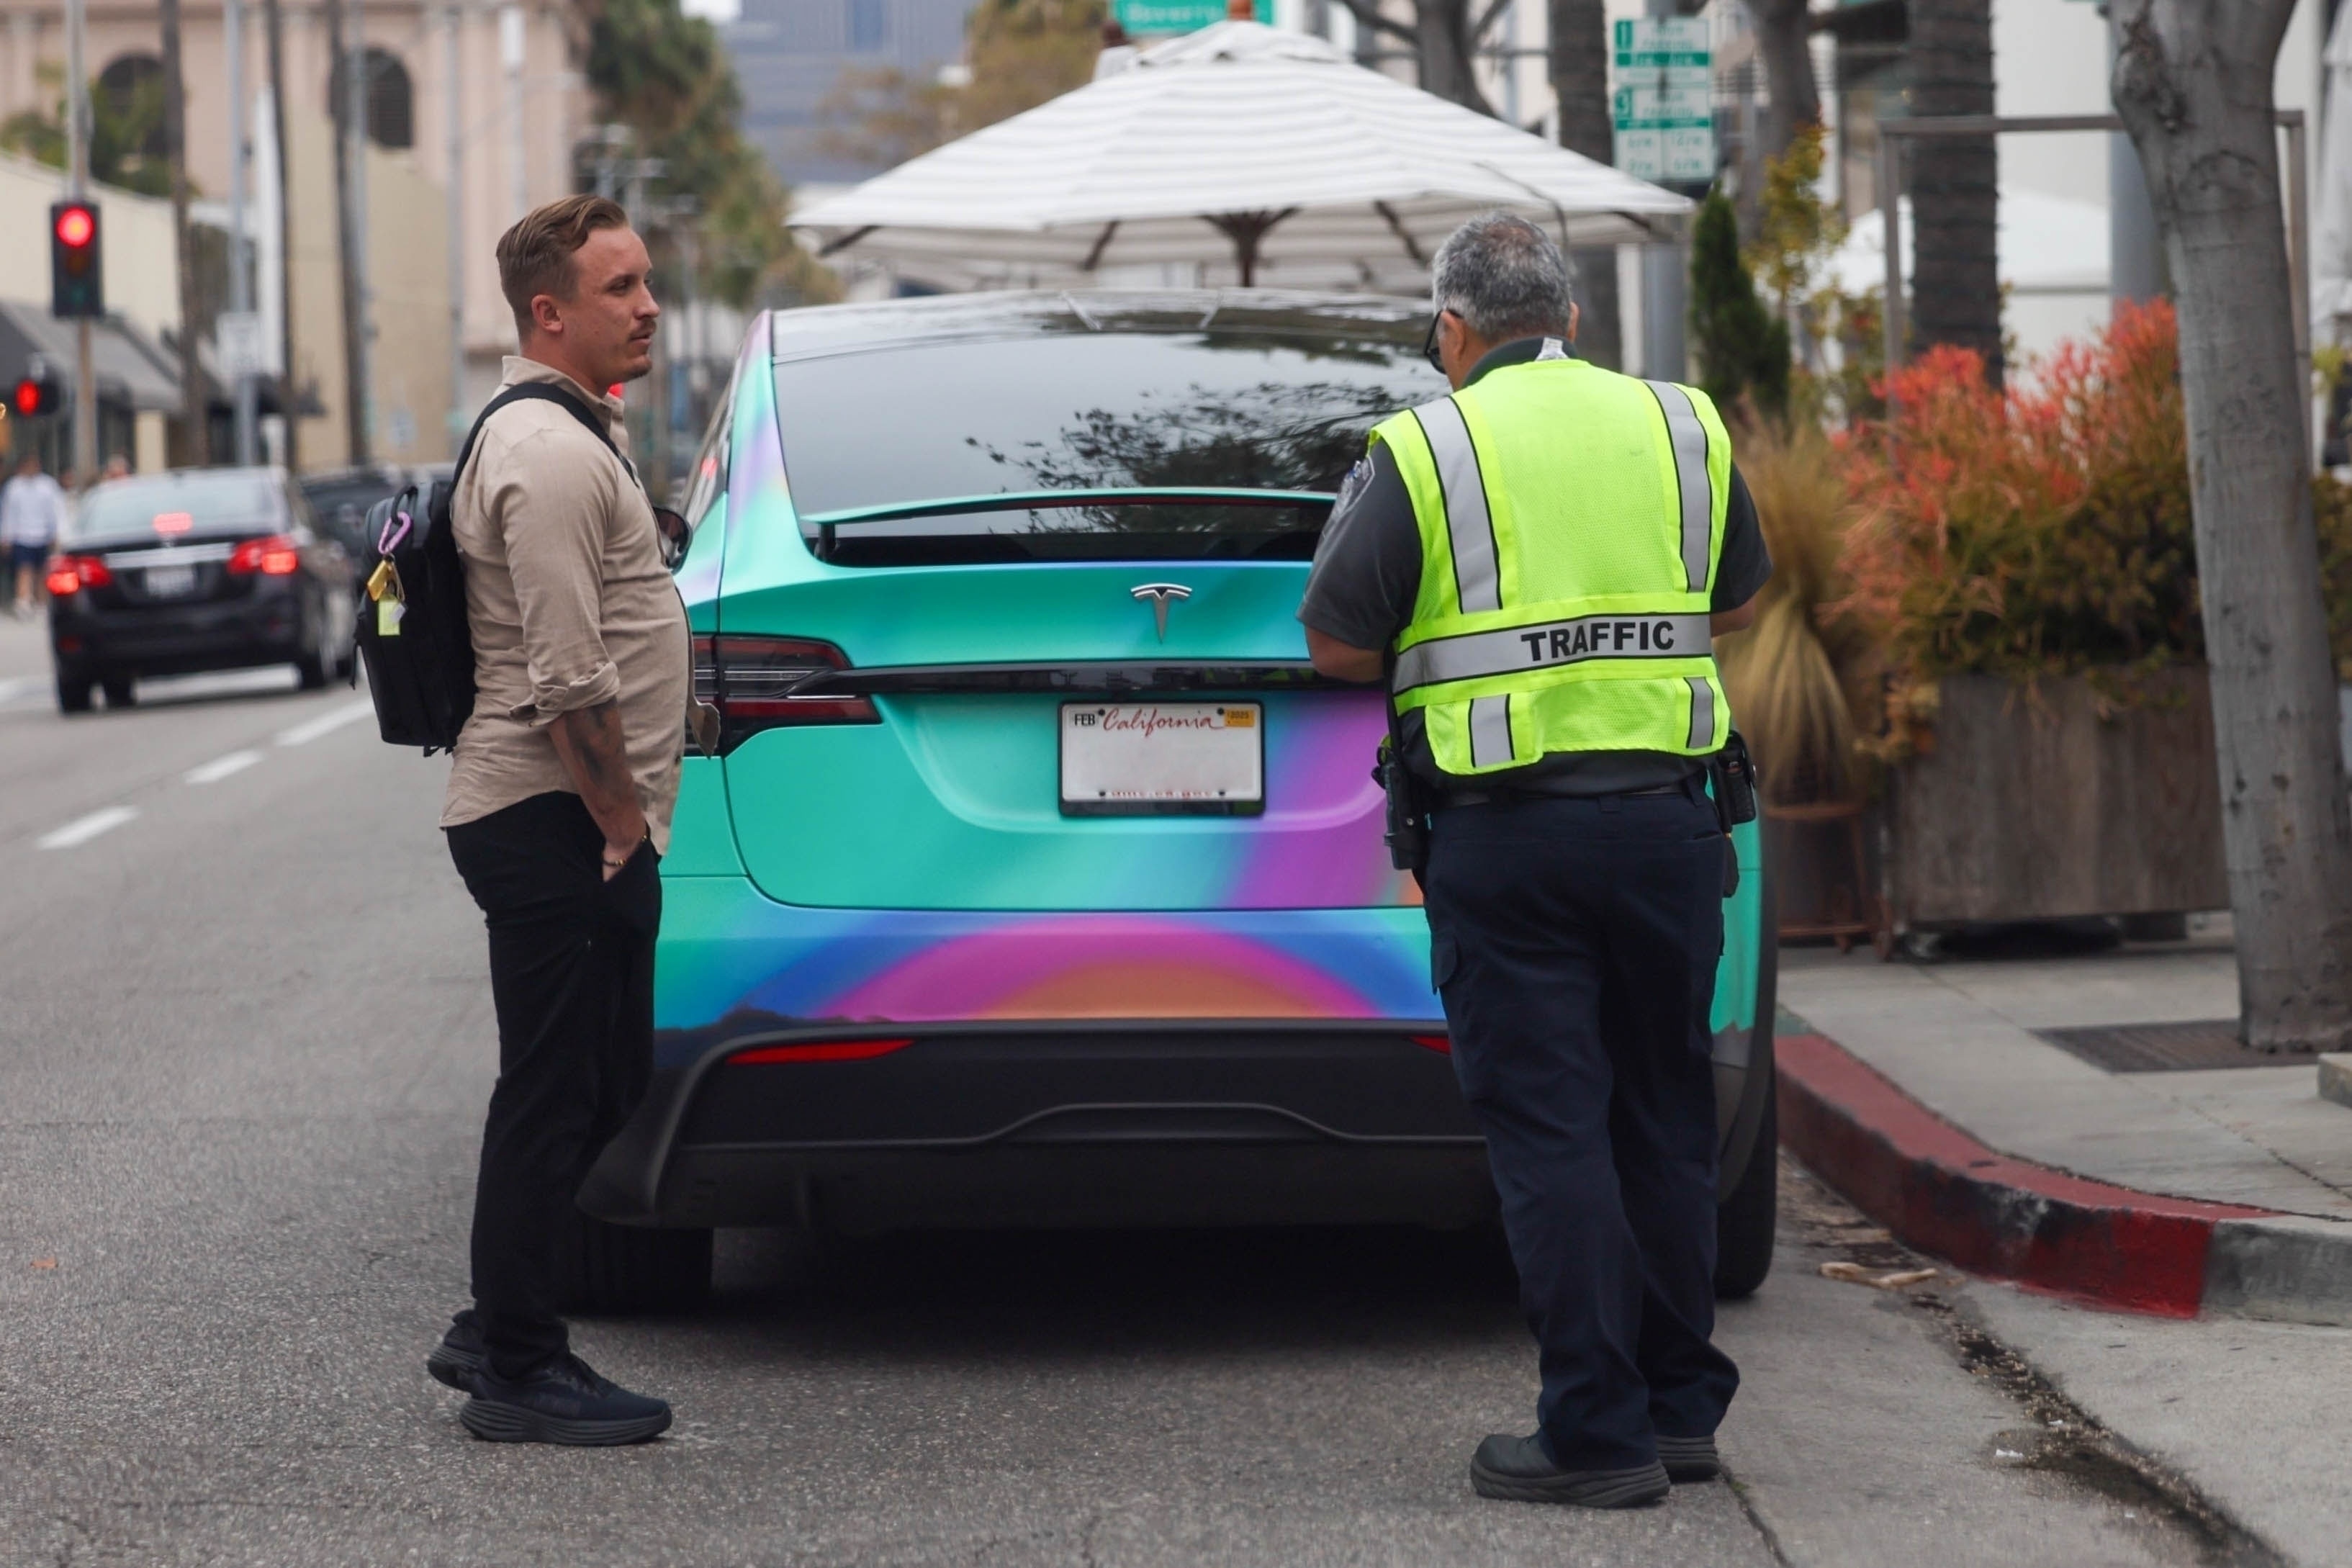 Jaden and Sab were spotted approaching his colorful Tesla Model X soon after parking enforcement had ticketed the red zone-parked vehicle